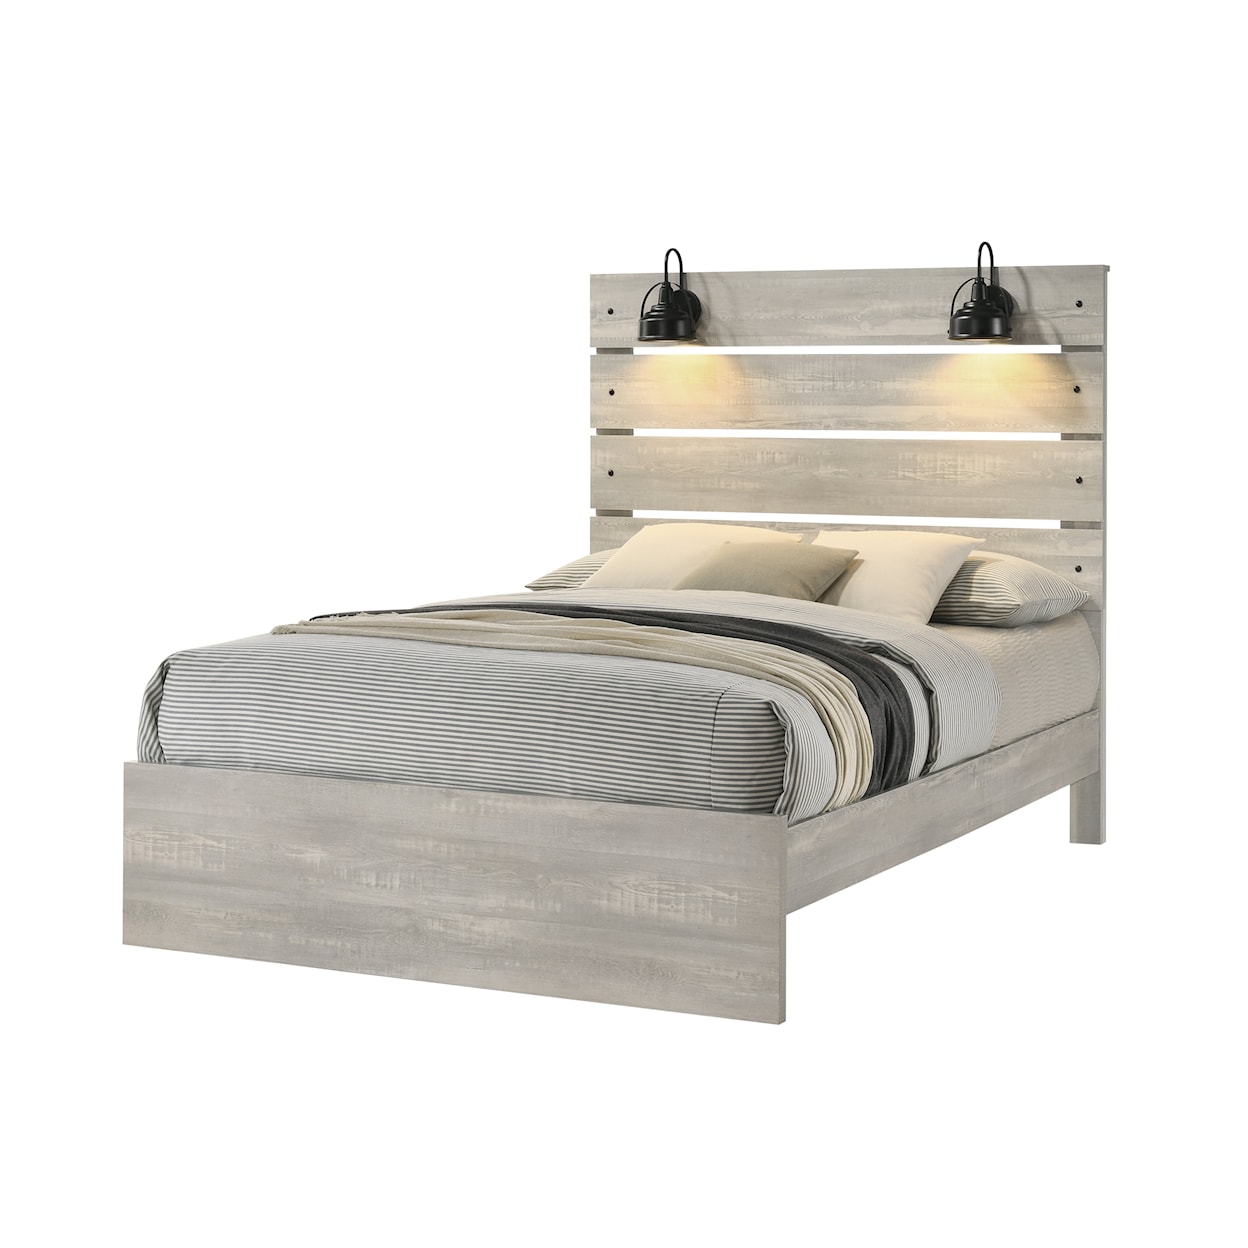 Lifestyle 0300 3 Piece Queen Bed